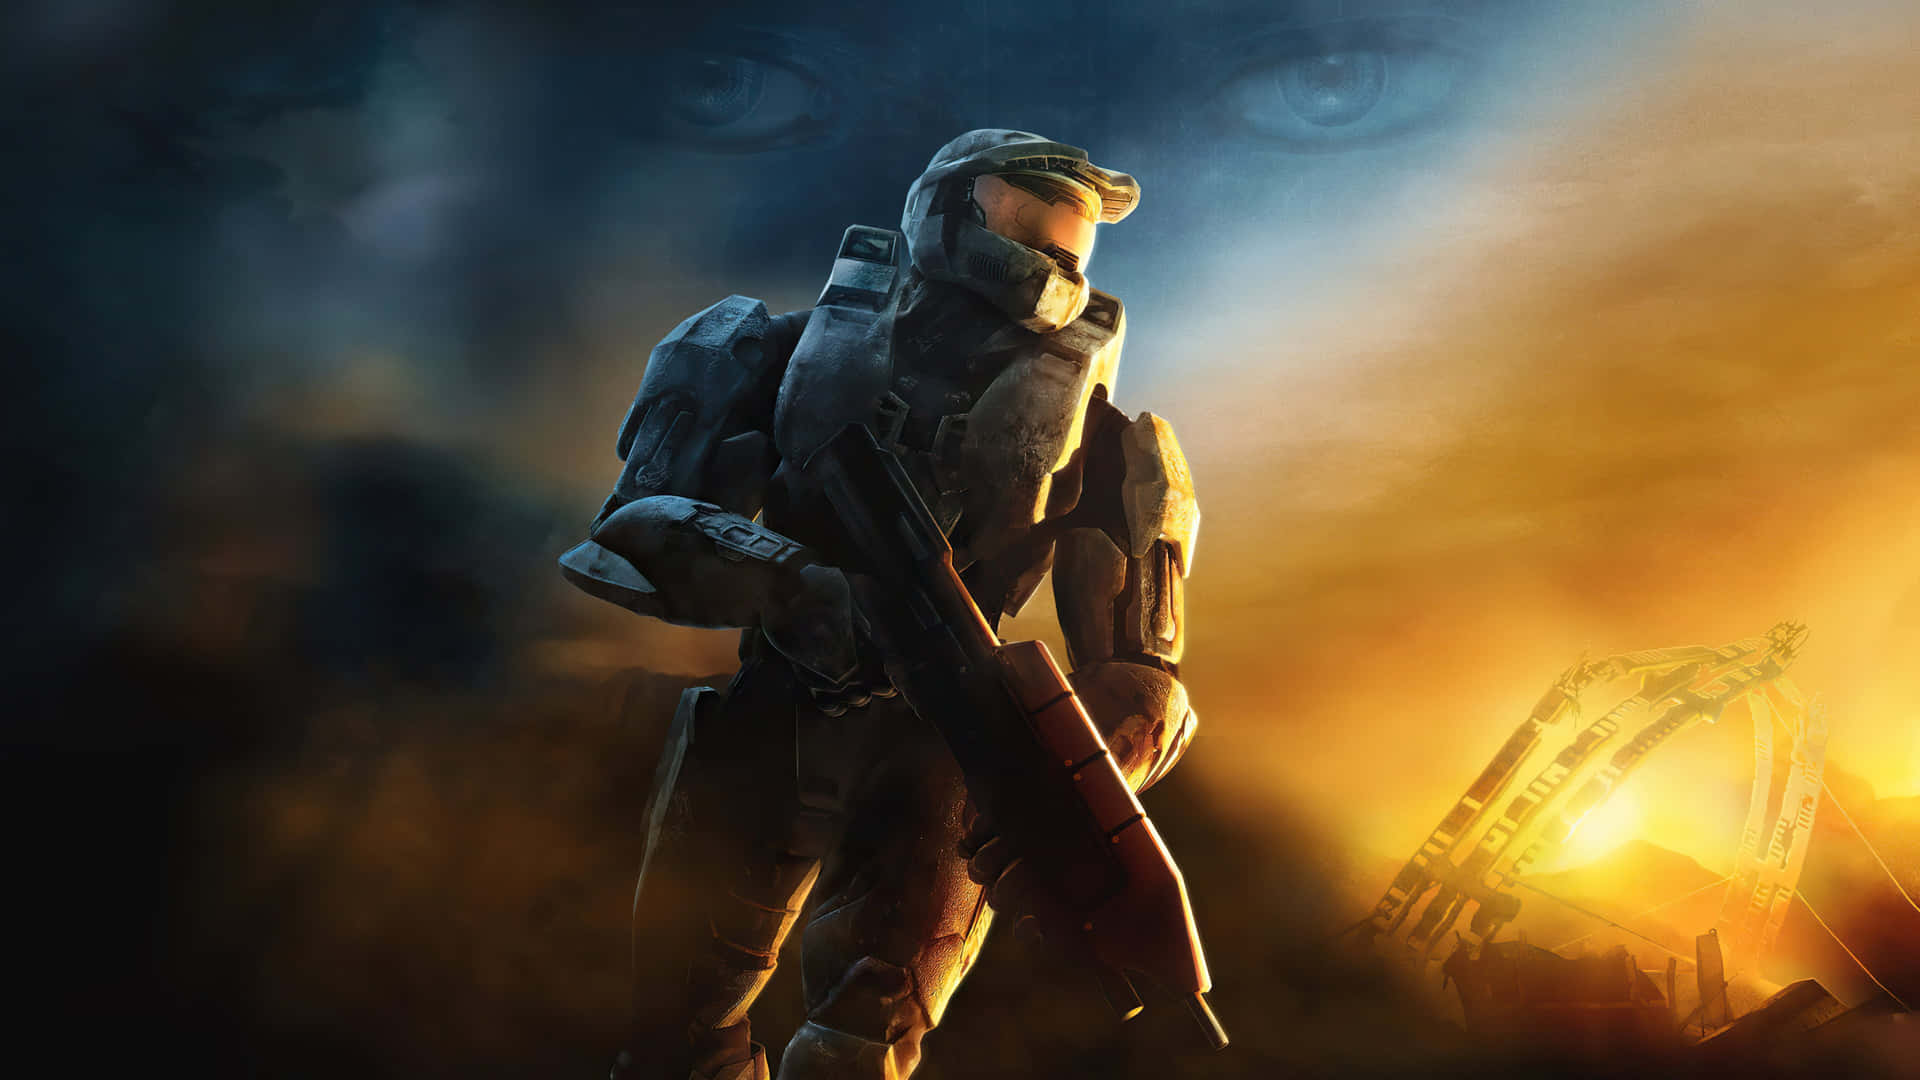 Join the Human-Covenant War With Halo